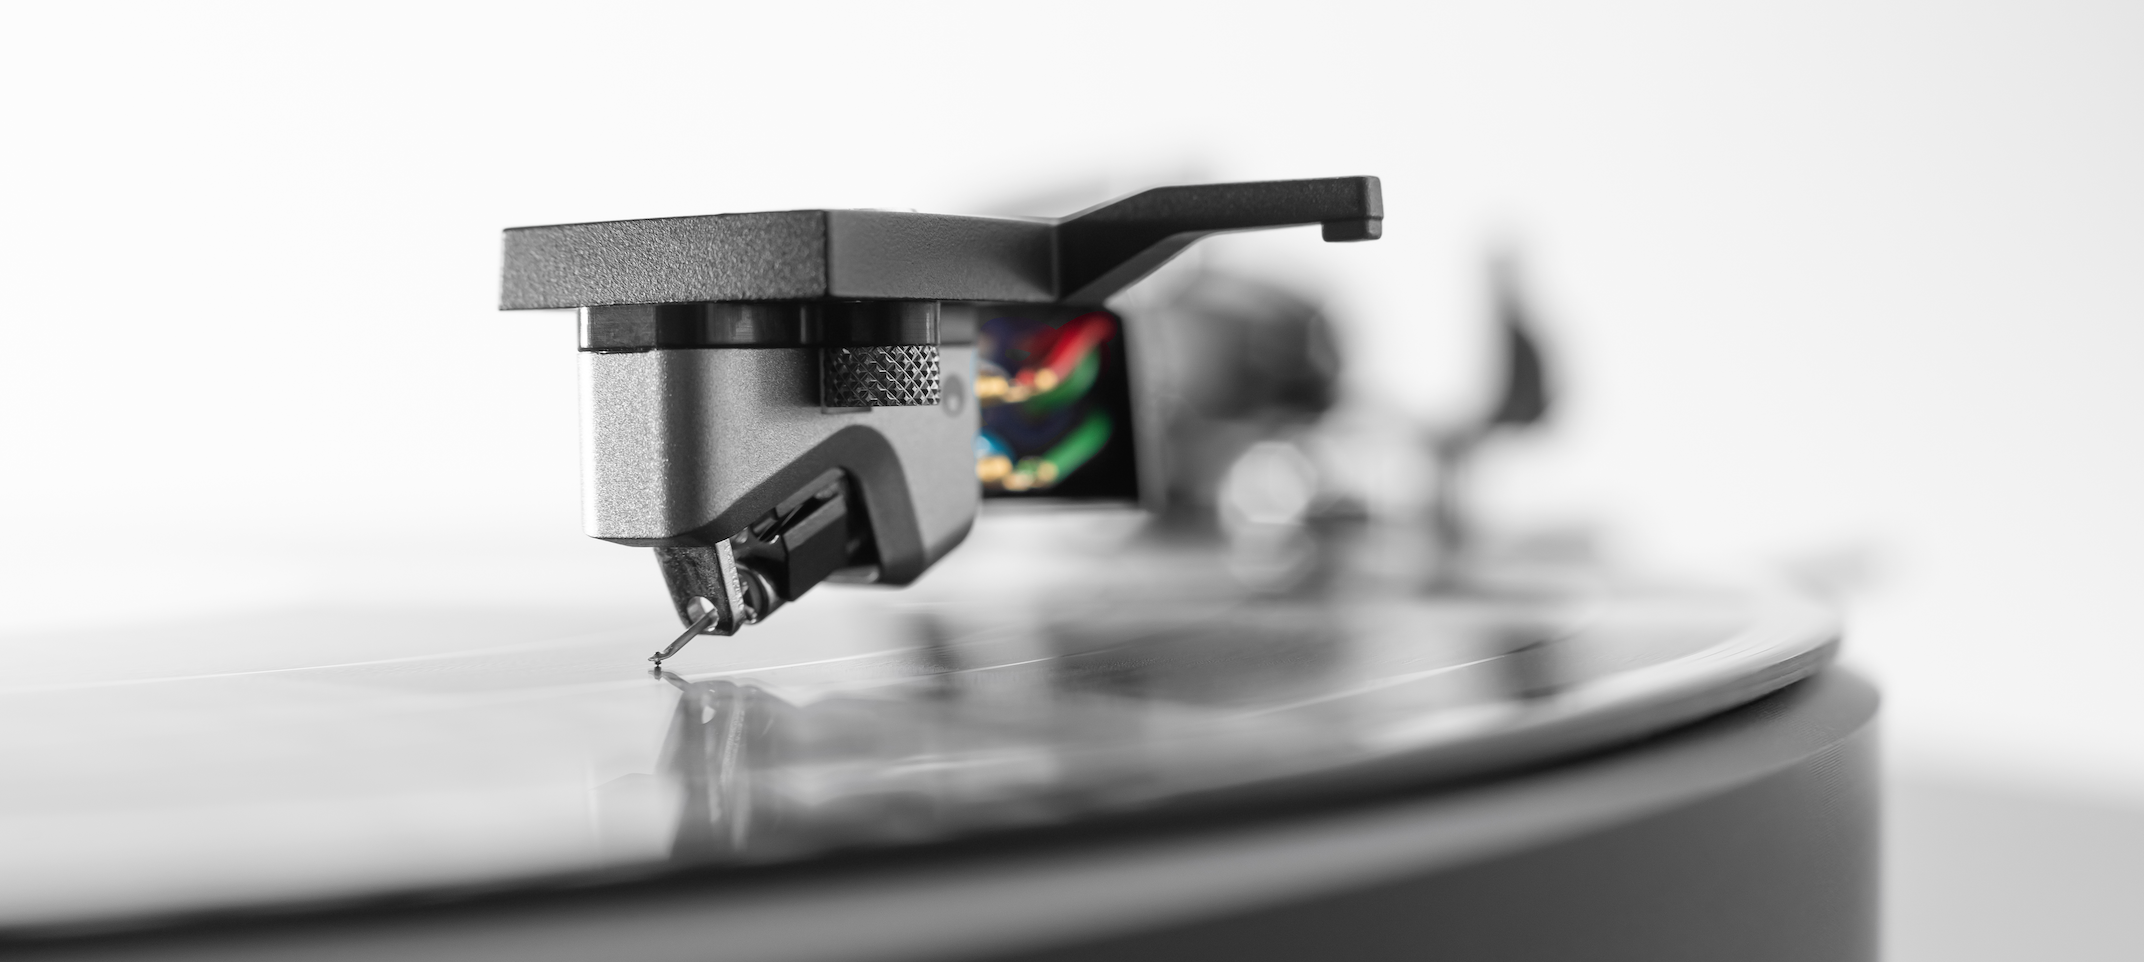 Cartridges 101 - An Introduction to Phono Cartridges